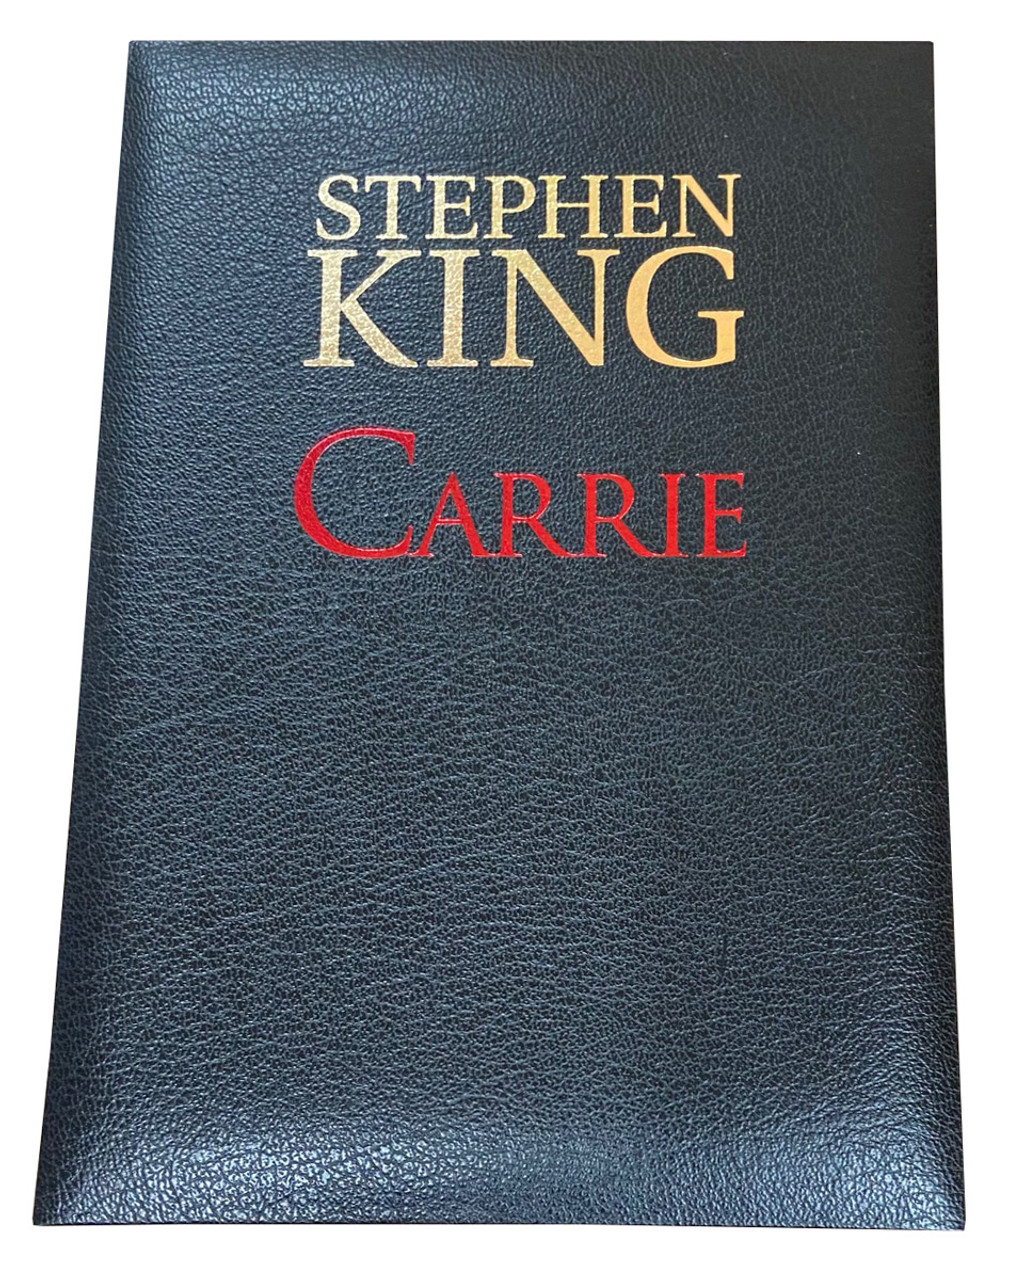 Stephen King, The Doubleday Years “Carrie”, “The Shining”, and “Salem’s Lot” Signed Lettered Artist Edition 3-Volume Matching “PC” Set of 52, Remarqued [Very Fine]